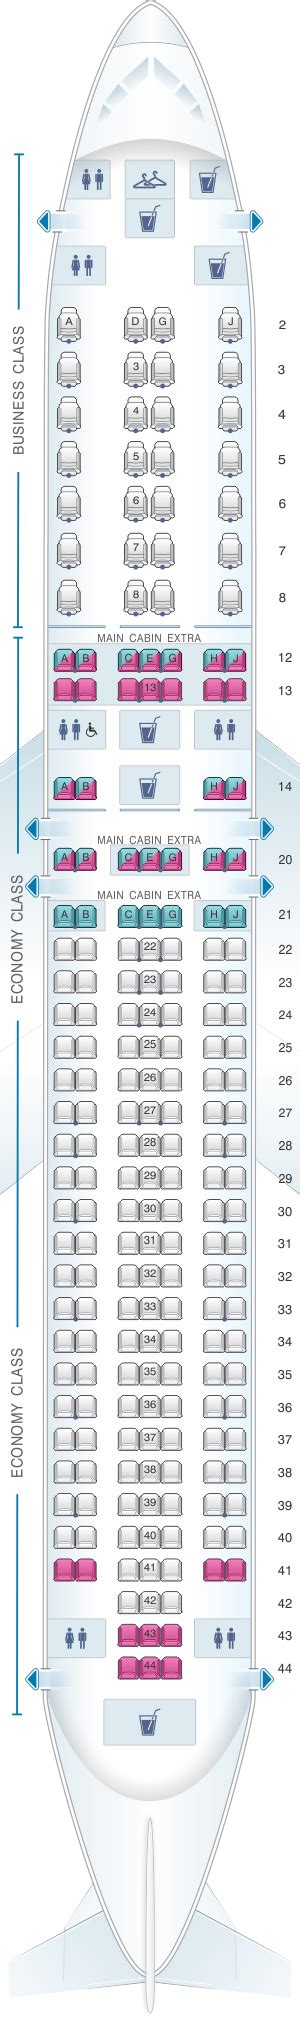 Seat Map American Airlines Boeing B767 300 Airplane Seats Boeing 767